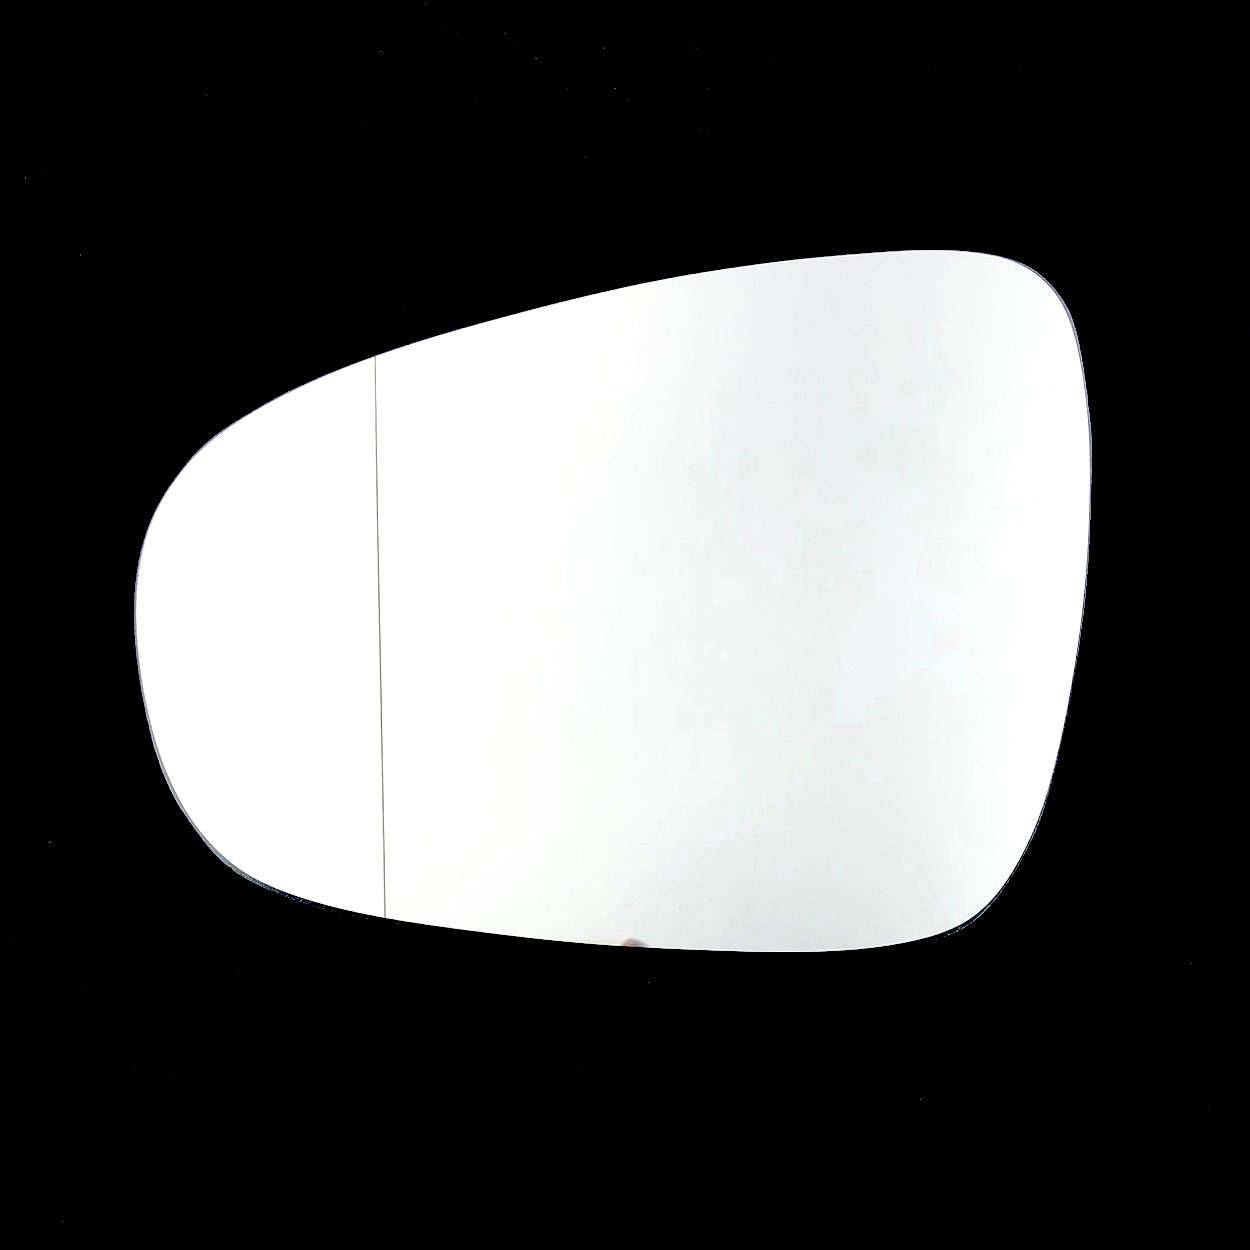 Lexus IS 350 Wing Mirror Glass LEFT HAND ( UK Passenger Side ) 2015 to 2021 – Convex Wing Mirror